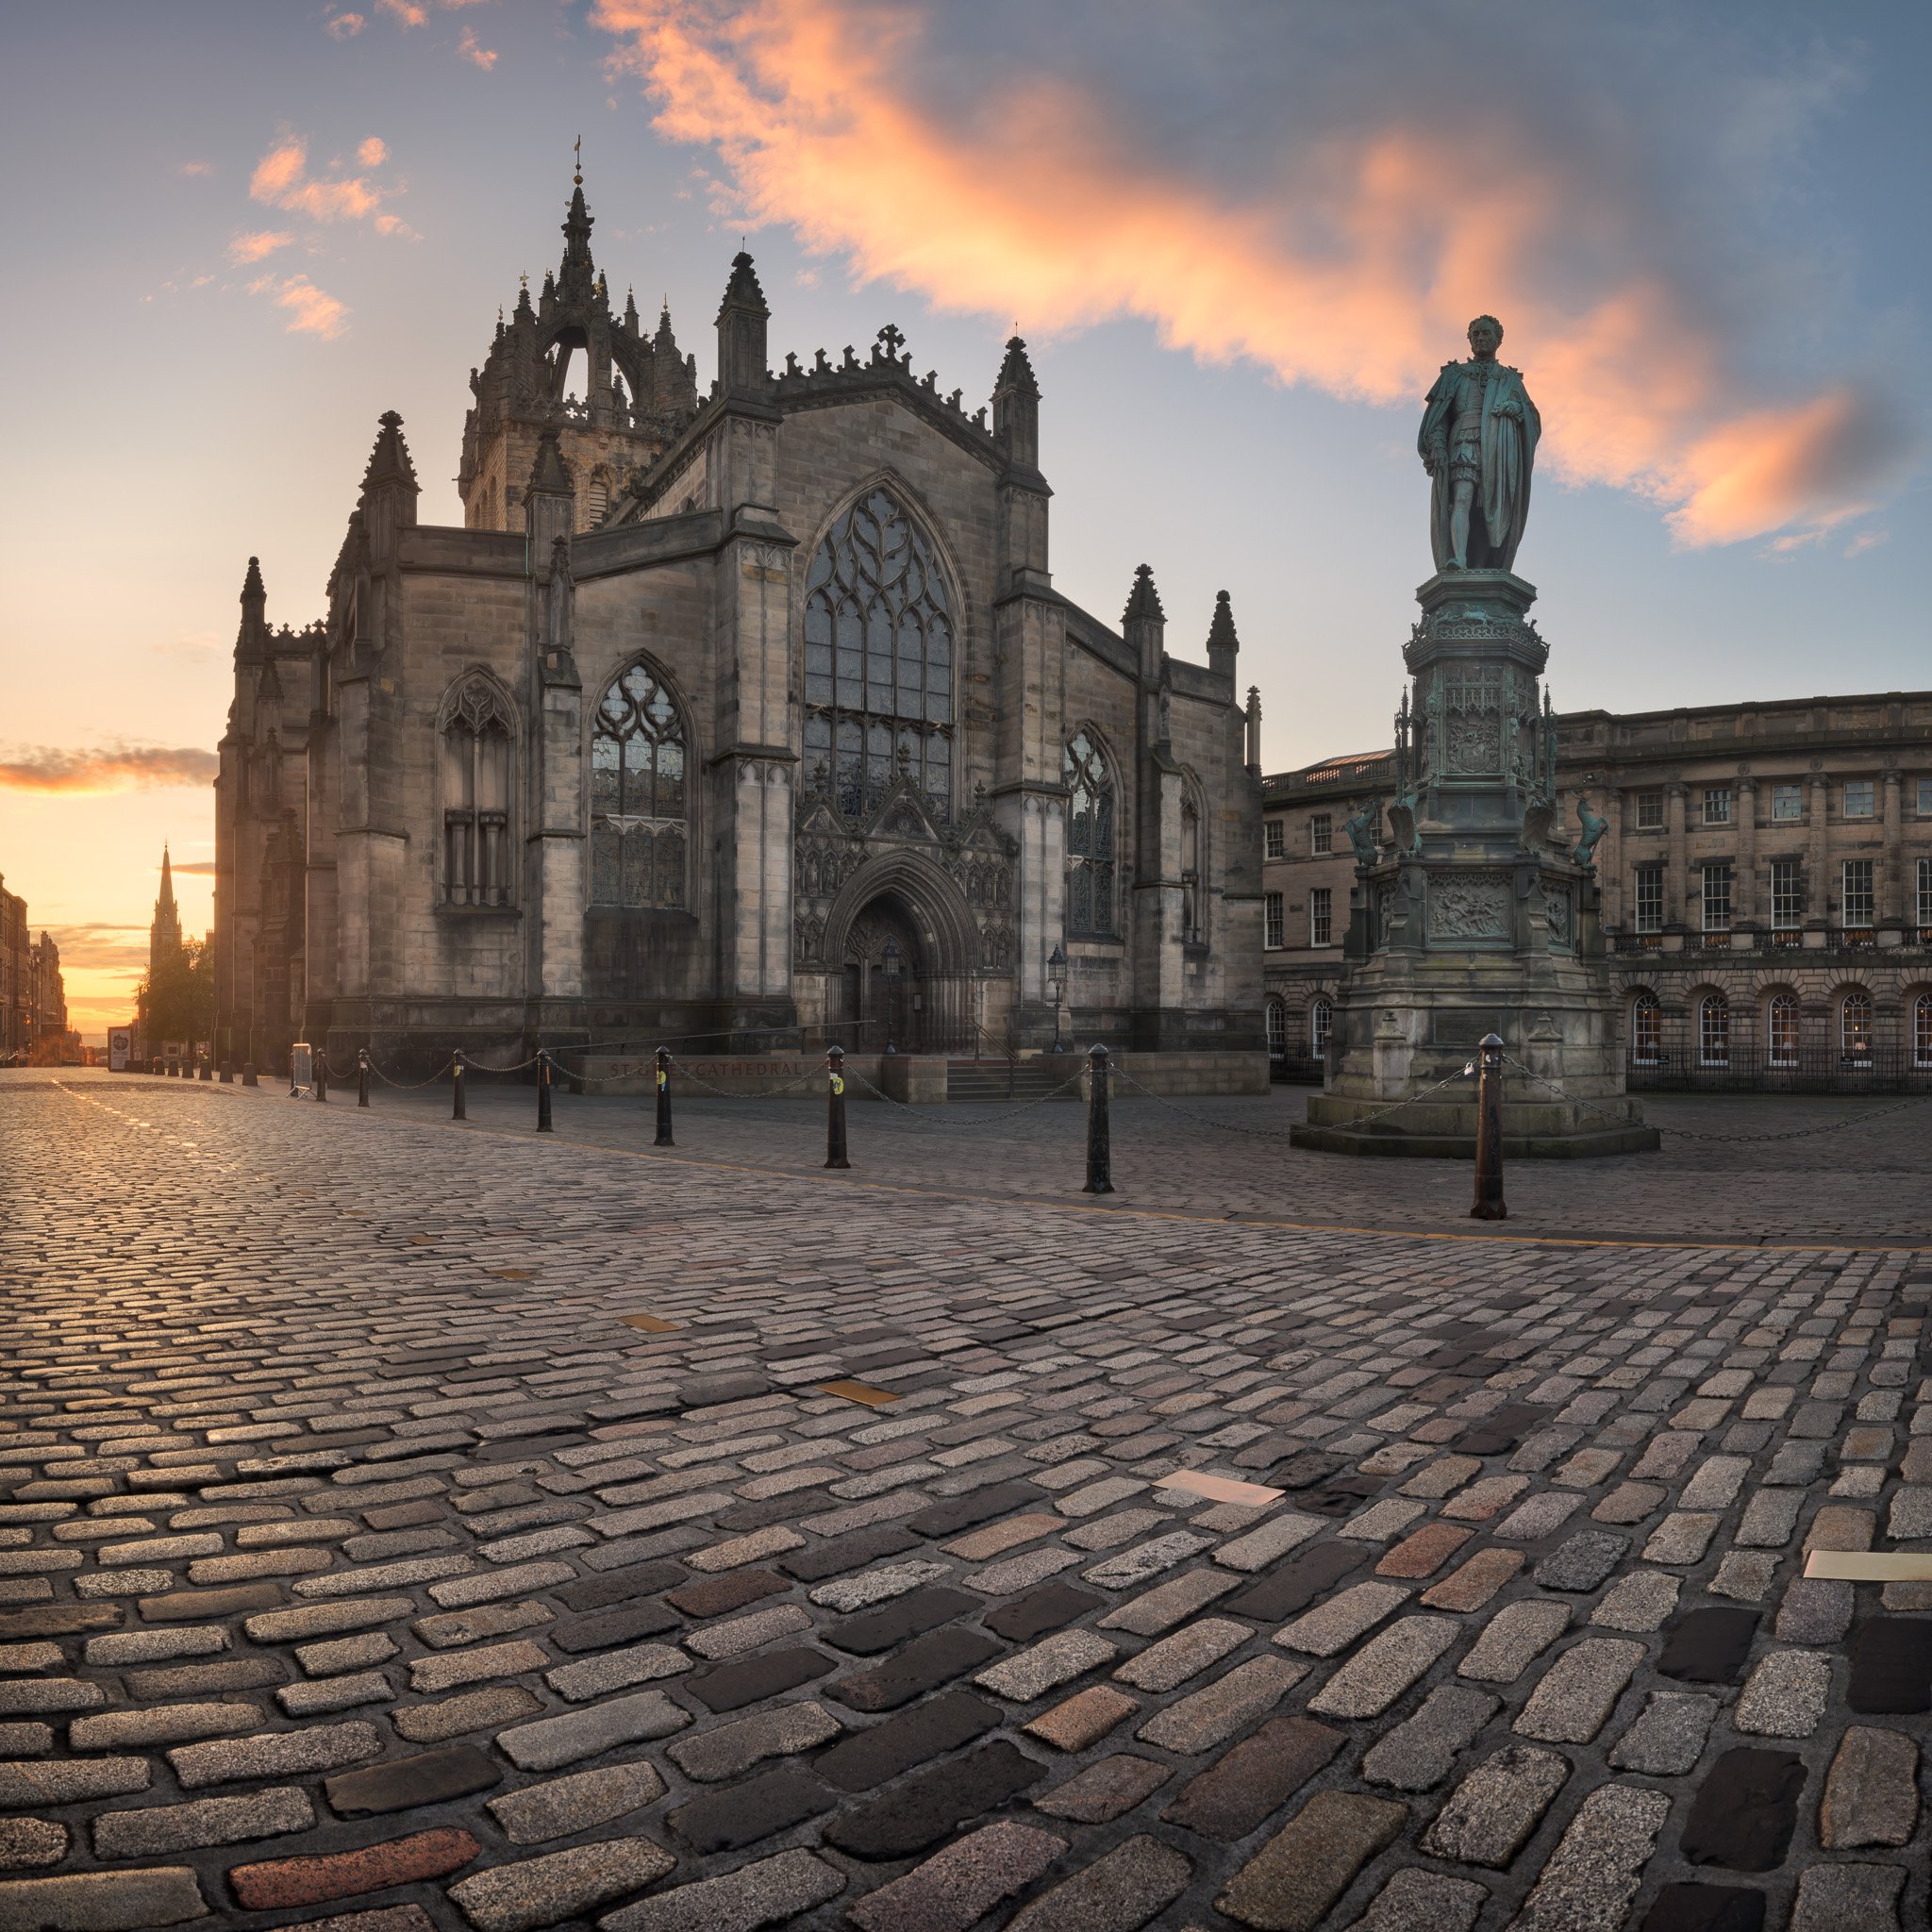 architecture, britain, british, building, cathedral, christian, church, city, cityscape, crown, dawn, edinburgh, europe, european, exterior, facade, famous, giles, gothic, historic, historical, history, kingdom, landmark, mile, monument, morning, old, rel, Andrey Omelyanchuk